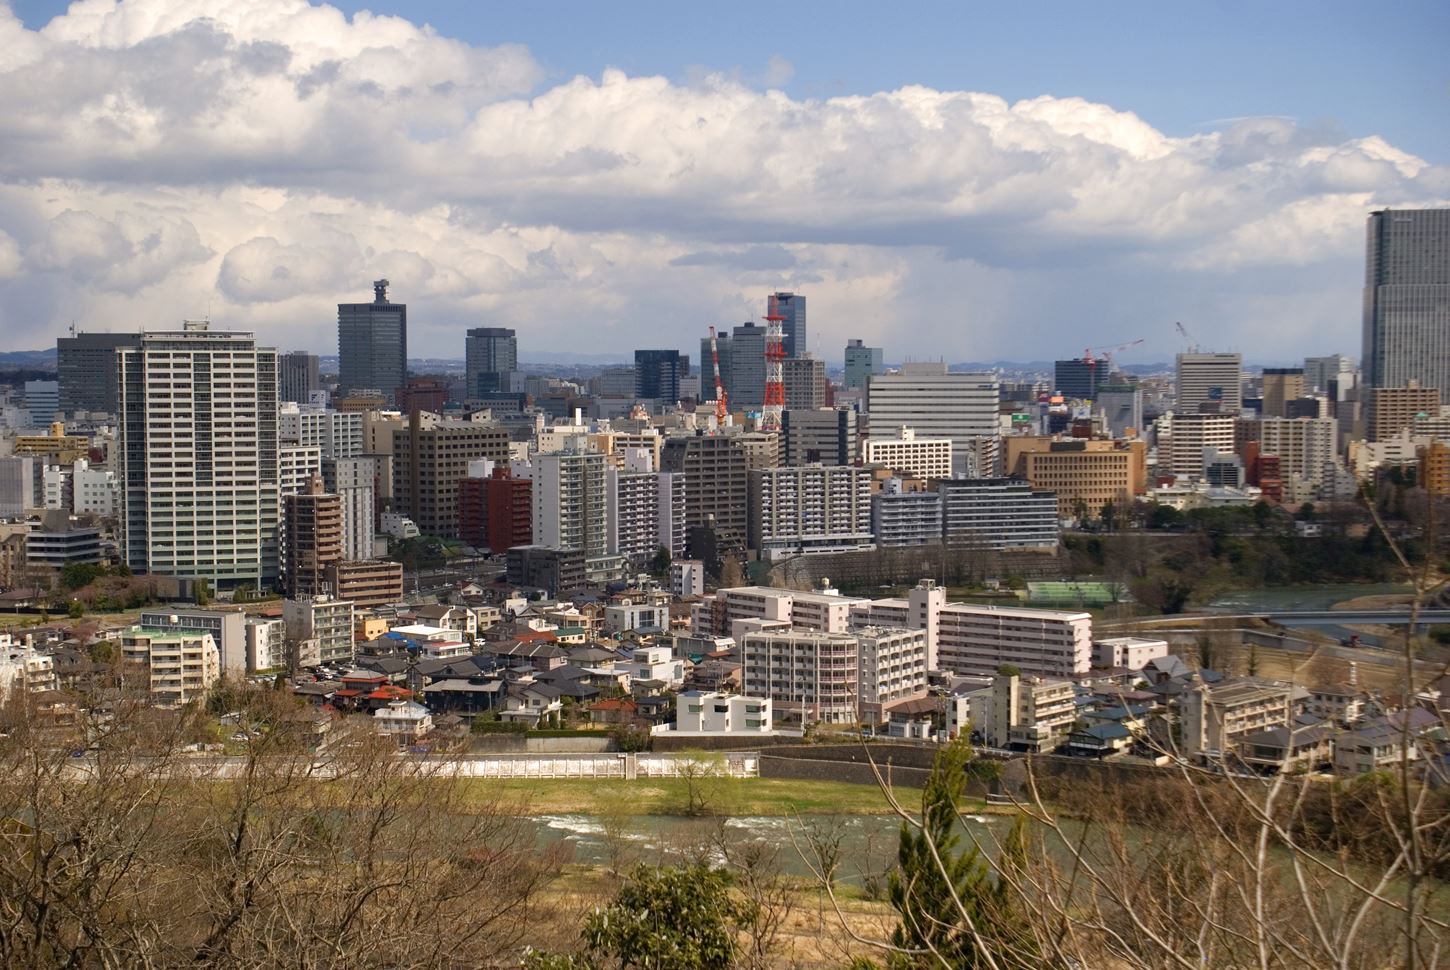 Sightseeing scenery that simply shows the weather in Sendai in April2